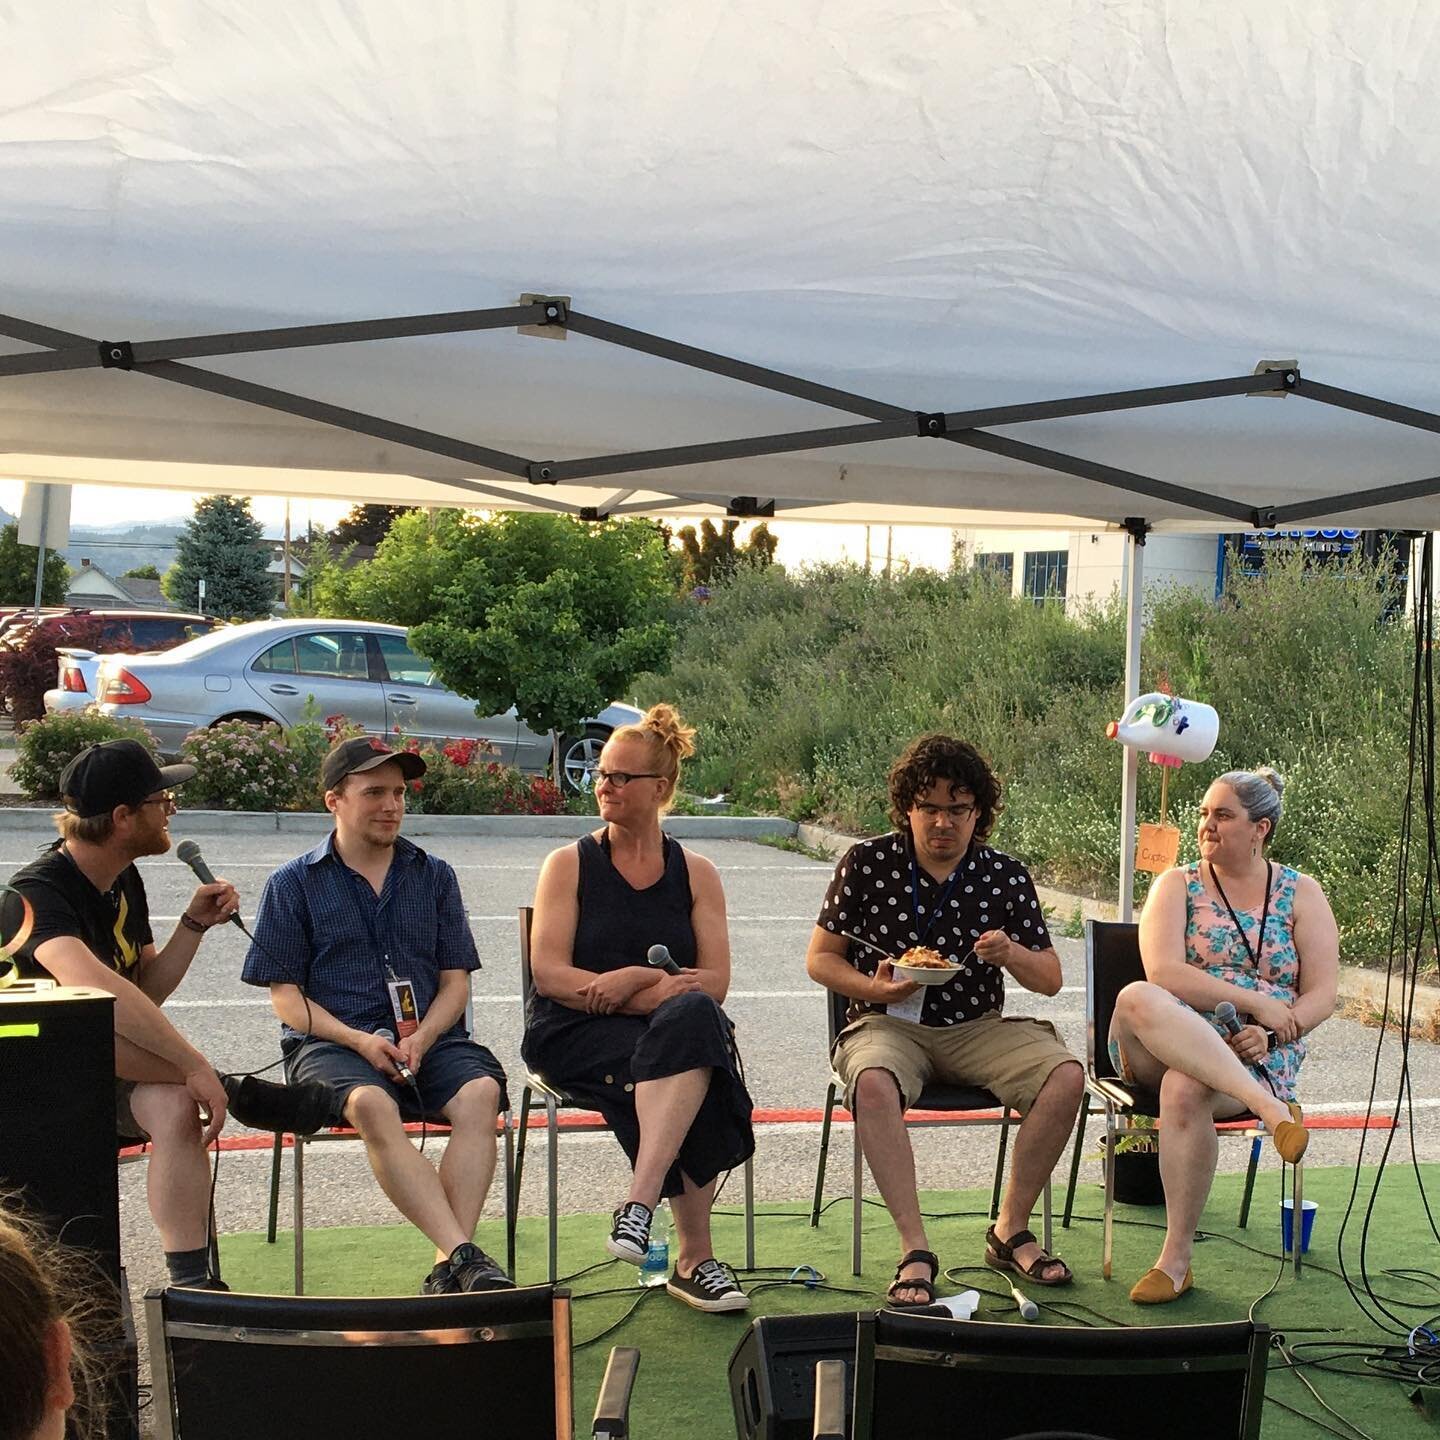 An evening chatting with the artists is a great way to wrap up day 2 of @theatre_on_the_edge_festival 
Join us tomorrow shows begin at 1pm with @shuswap_theatre &lsquo;s own Laughing Gas Improv Troupe 
#shareshuswap  #exploreshuswap #salmonarm #downt